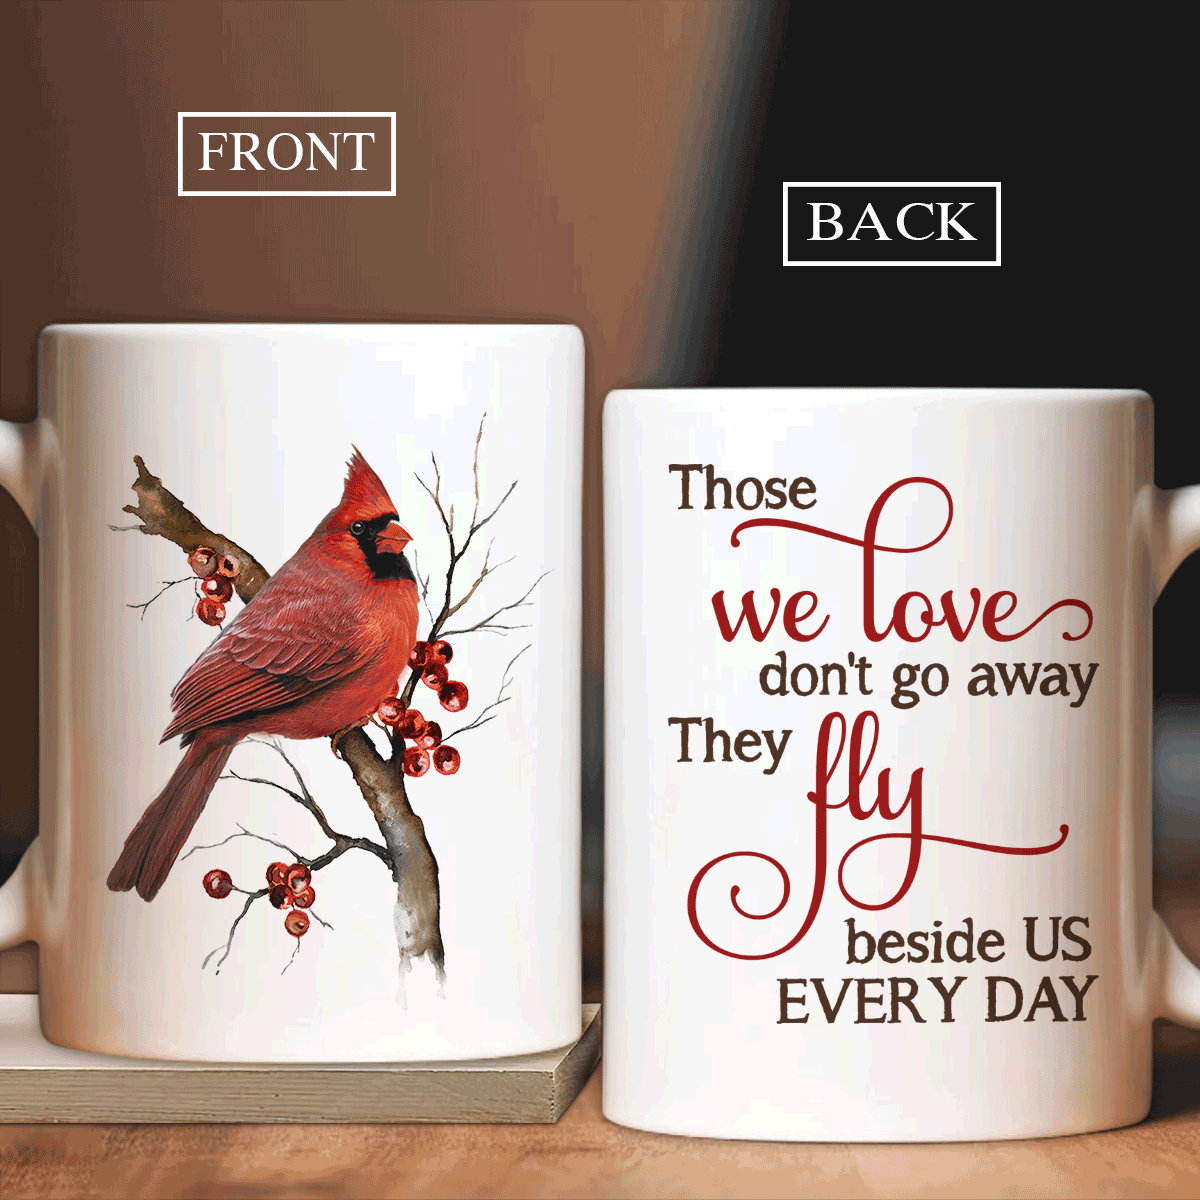 Memorial White Mug - Red cardinal, Cranberry painting Mug - Gift for members family - Those we love don't go away, they fly beside us every day Mug